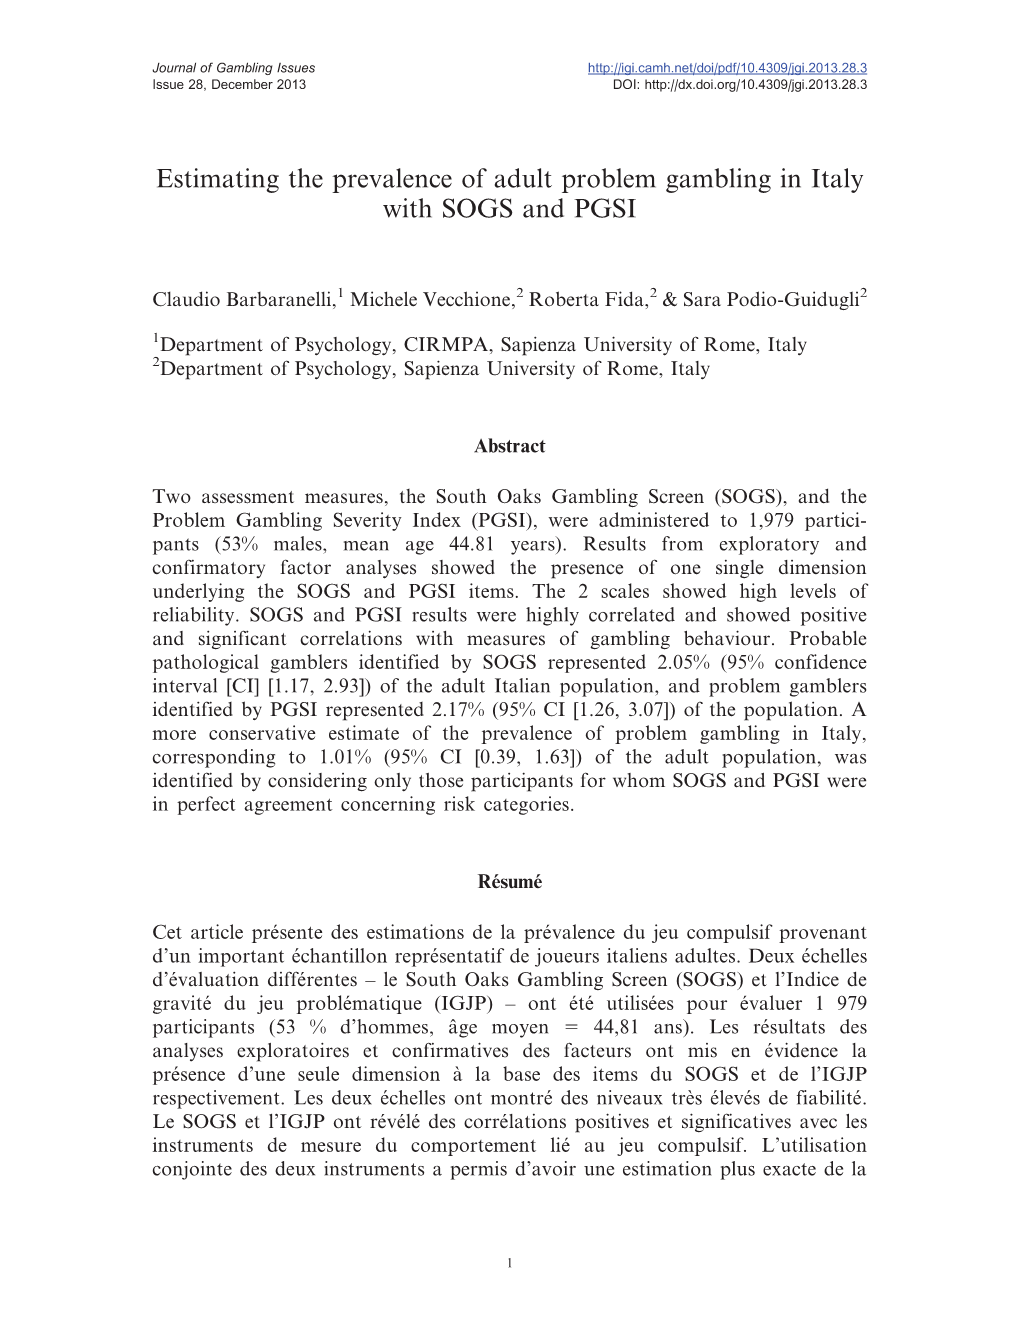 Estimating the Prevalence of Adult Problem Gambling in Italy with SOGS and PGSI